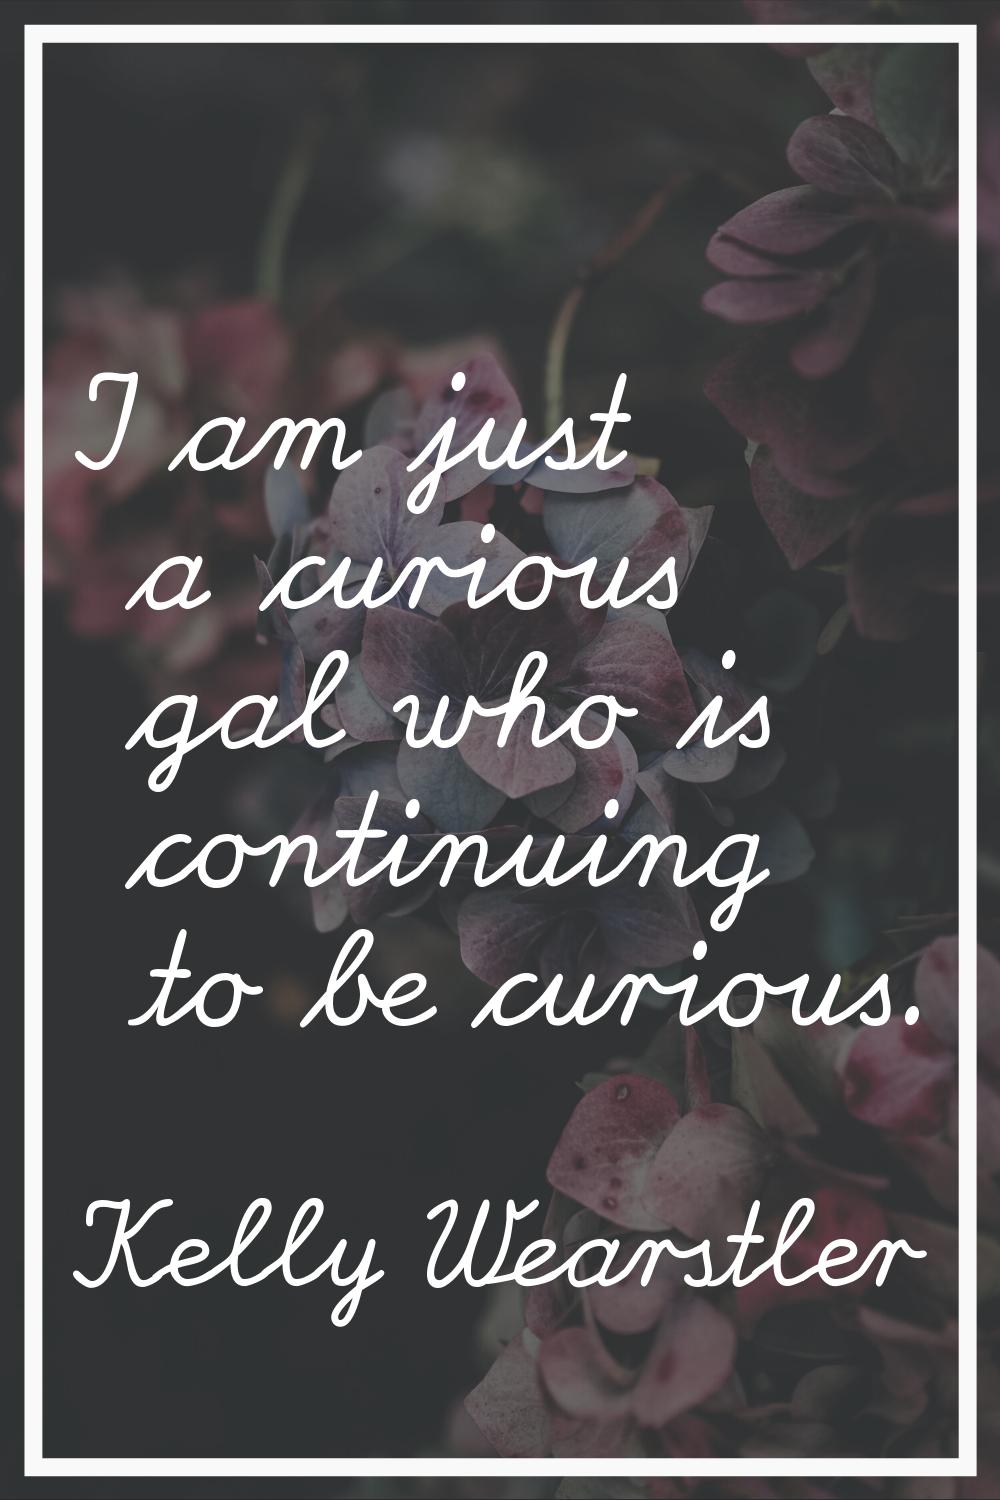 I am just a curious gal who is continuing to be curious.